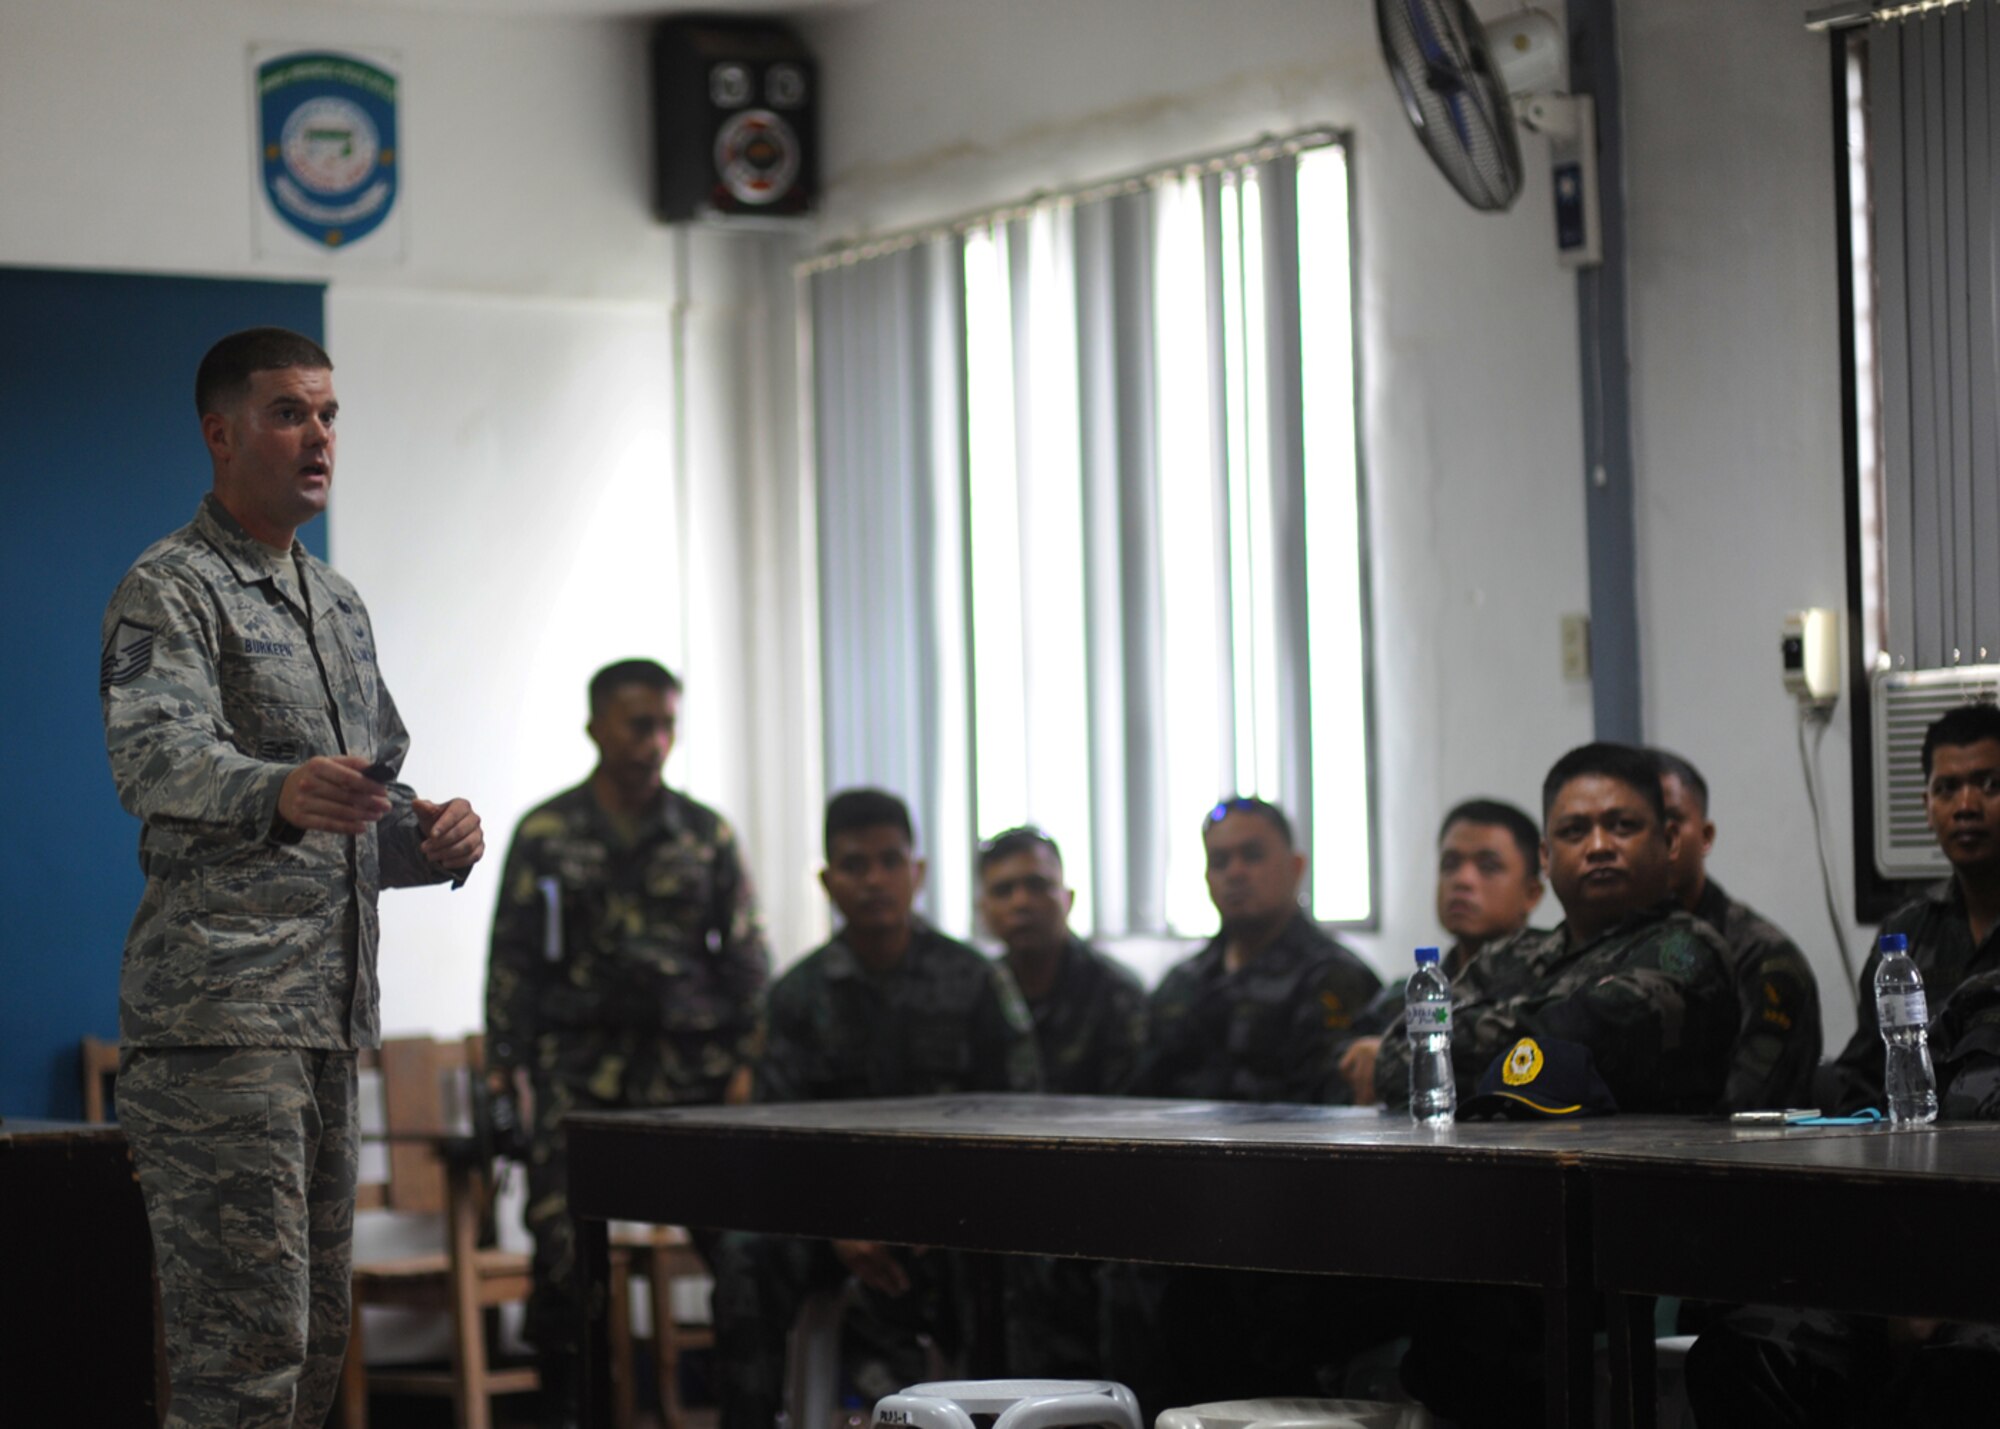 U.S. Air Force Master Sgt. Jeremy Burkeen, from 736th Security Forces Squadron at Andersen Air Force Base, Guam, discusses non-lethal crowd control techniques with members of the Philippines national police and Armed Forces of the Philippines during Pacific Angel in Tagbiliran City, Philippines, Aug. 16, 2015. Efforts undertaken during Pacific Angel help multilateral militaries in the Pacific improve and build relationships across a wide spectrum of civic operations, which bolsters each nation’s capacity to respond and support future humanitarian assistance and disaster relief operations. (U.S. Air Force photo by Tech. Sgt. Aaron Oelrich/Released)